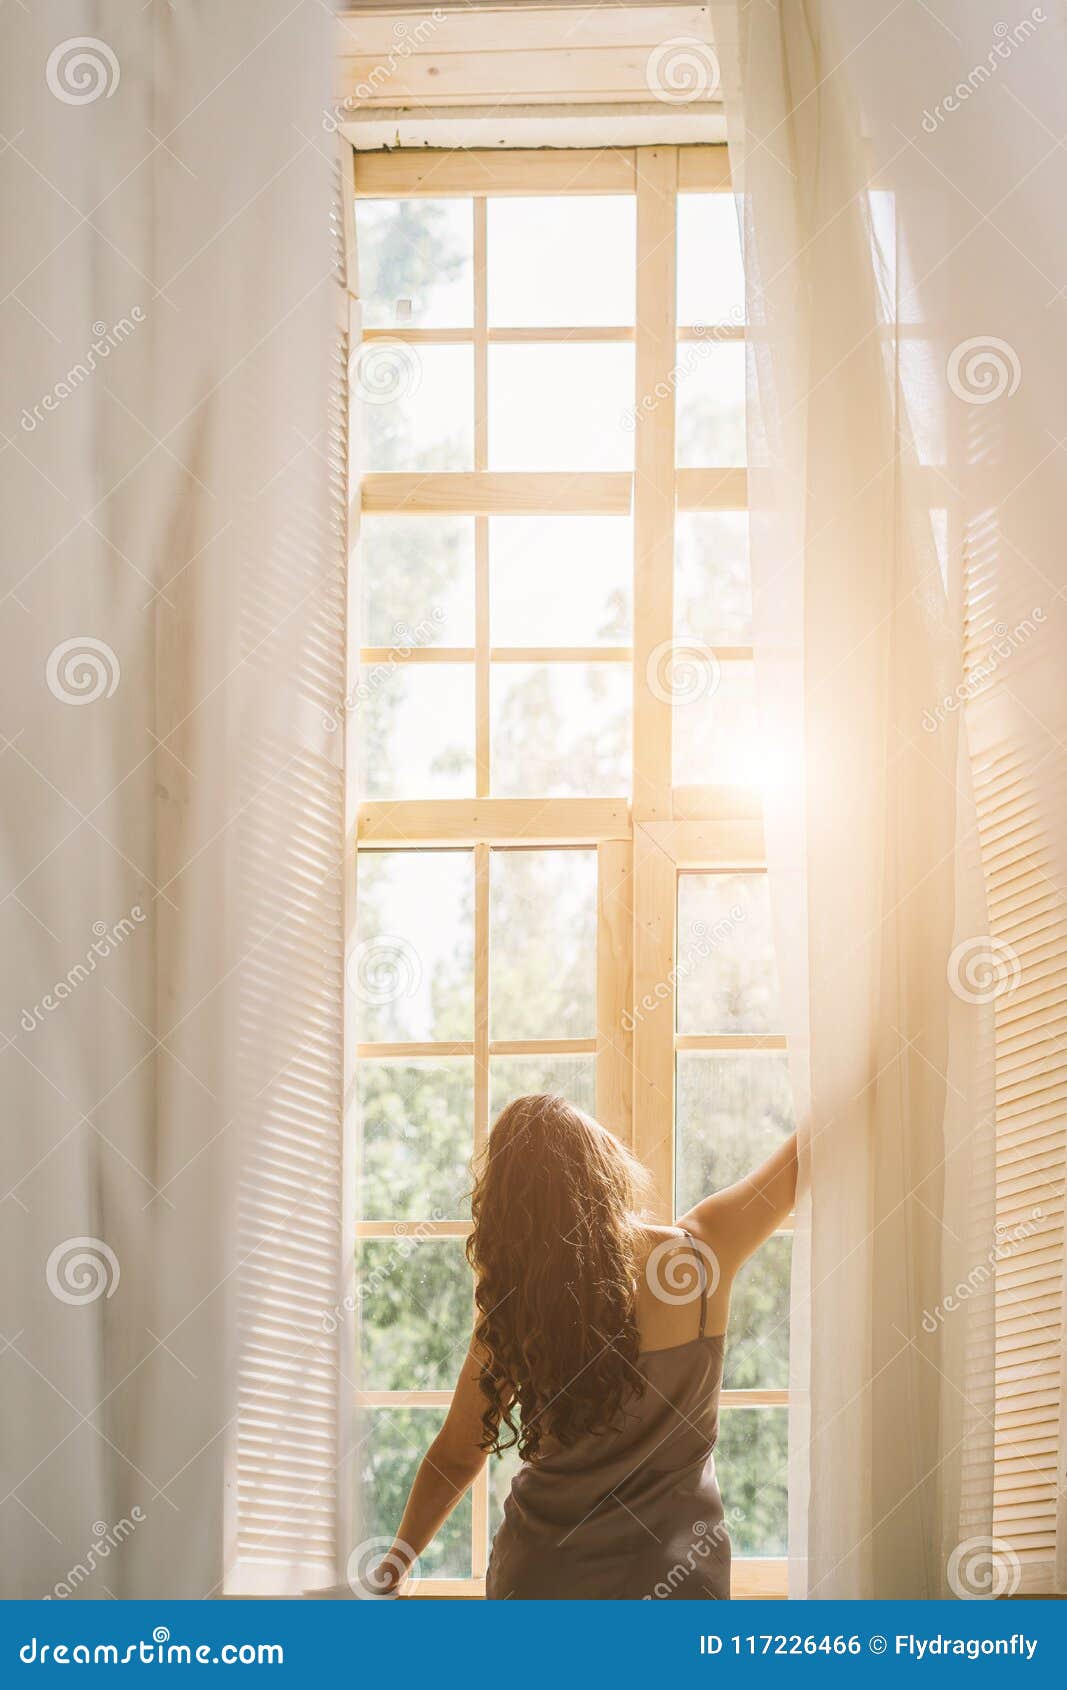 Good Morning Mood. Woman Opening Window. View From Back Stock Photo ... Open Window At Morning